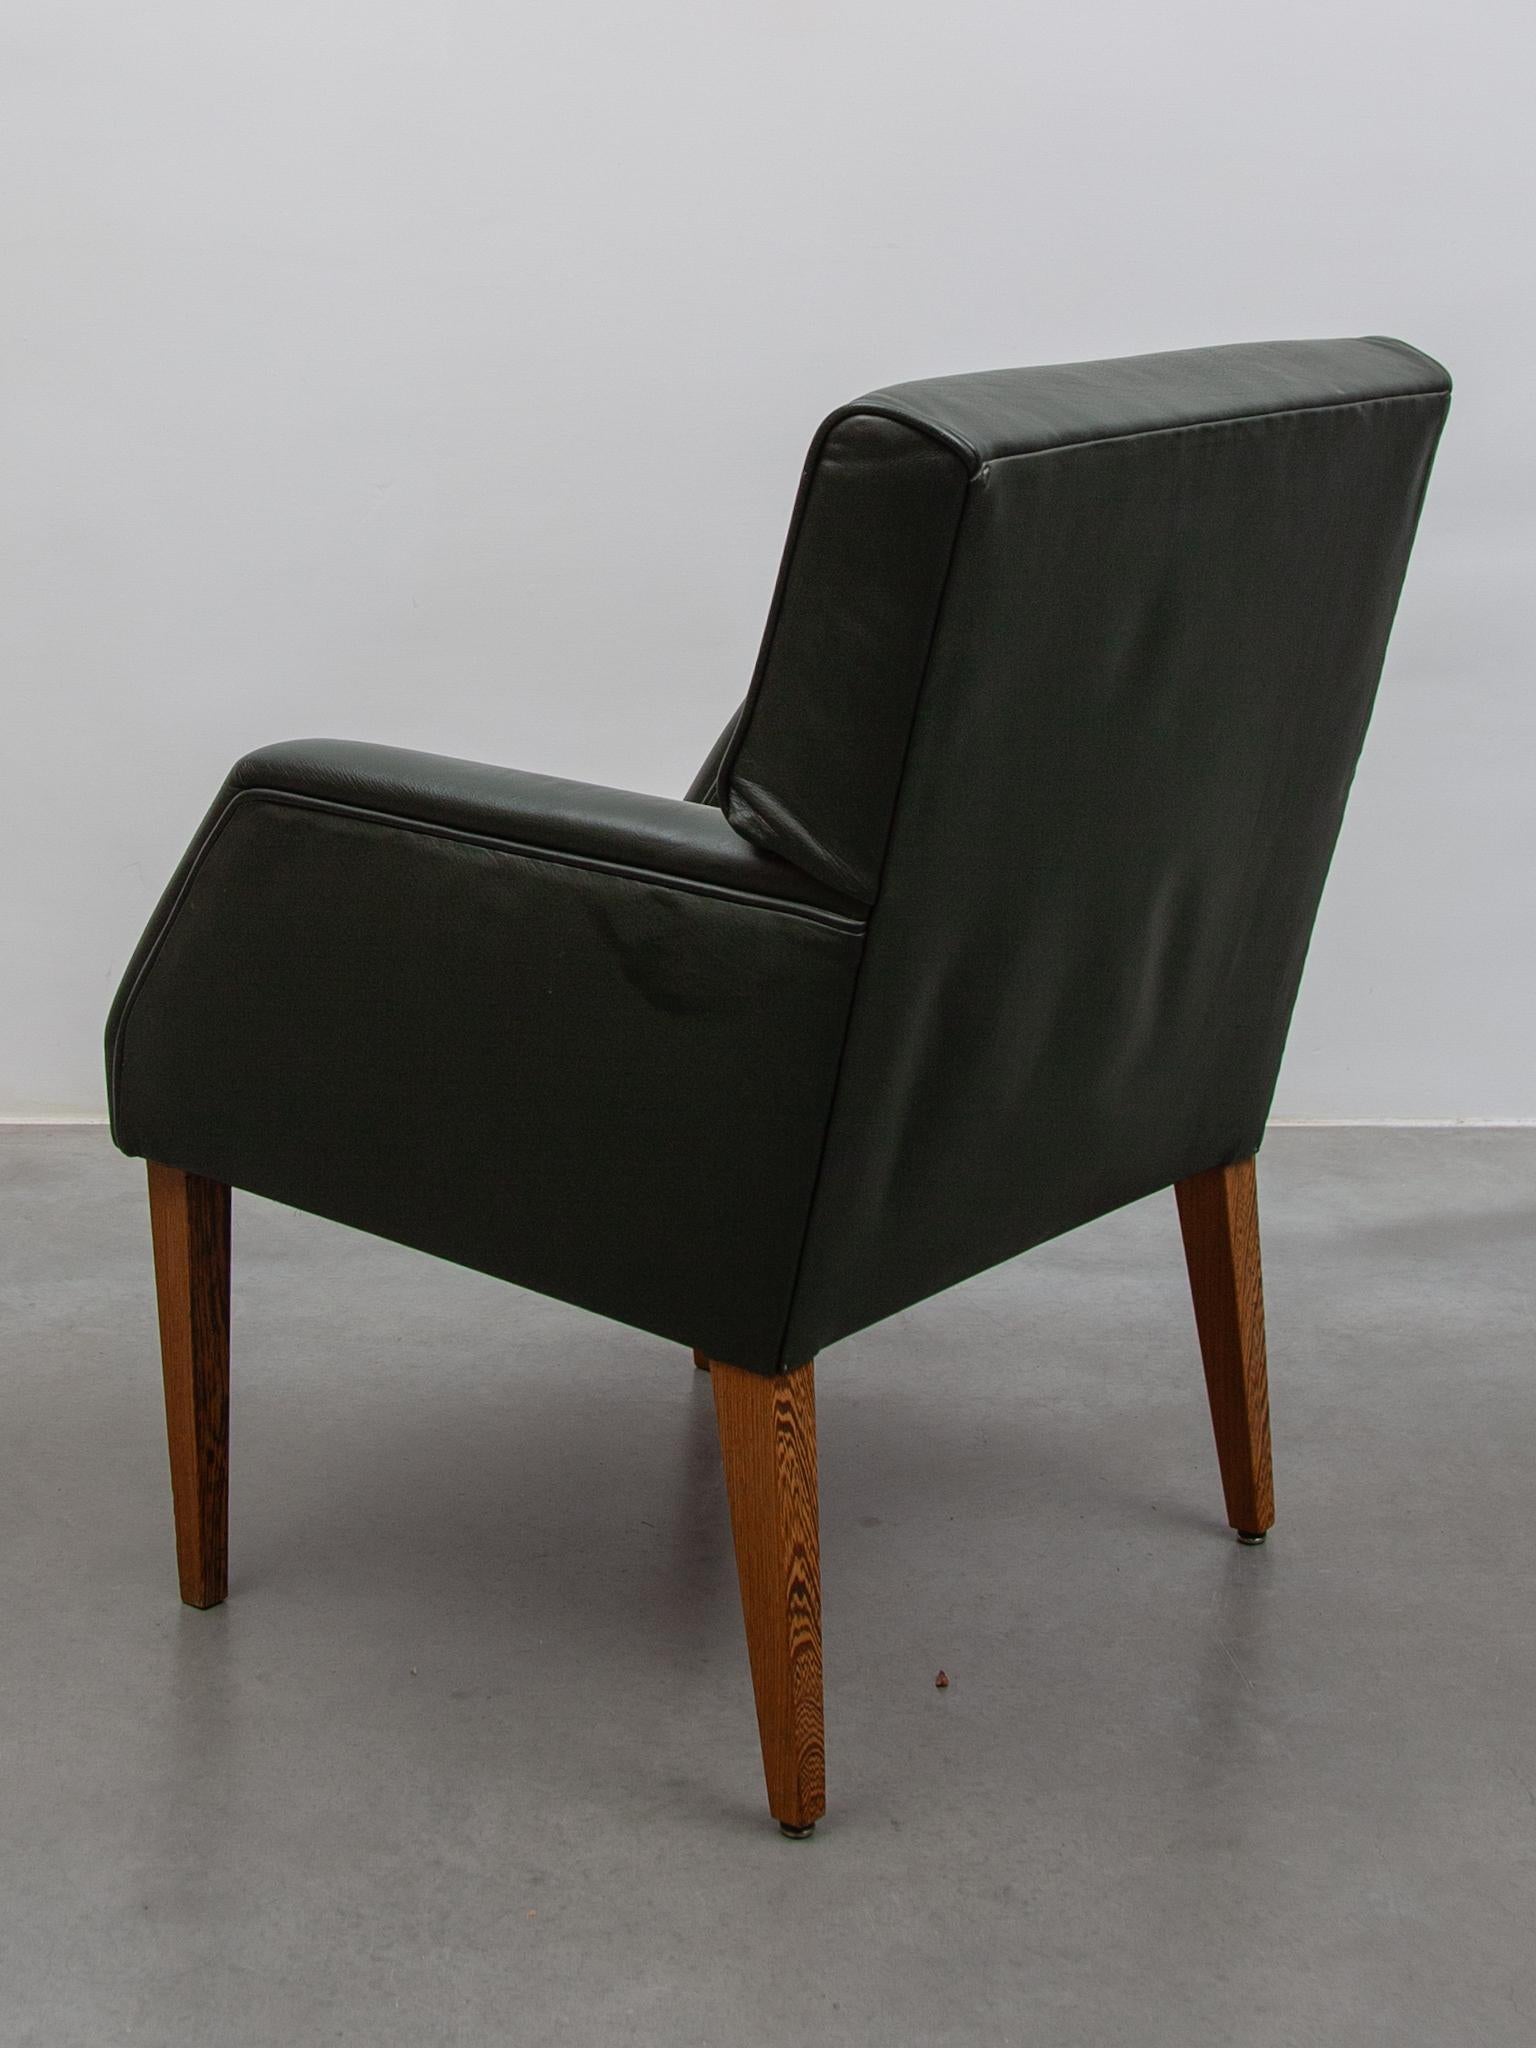 Set of Four Green Leather Arm Lounge Chairs, Denmark For Sale 3